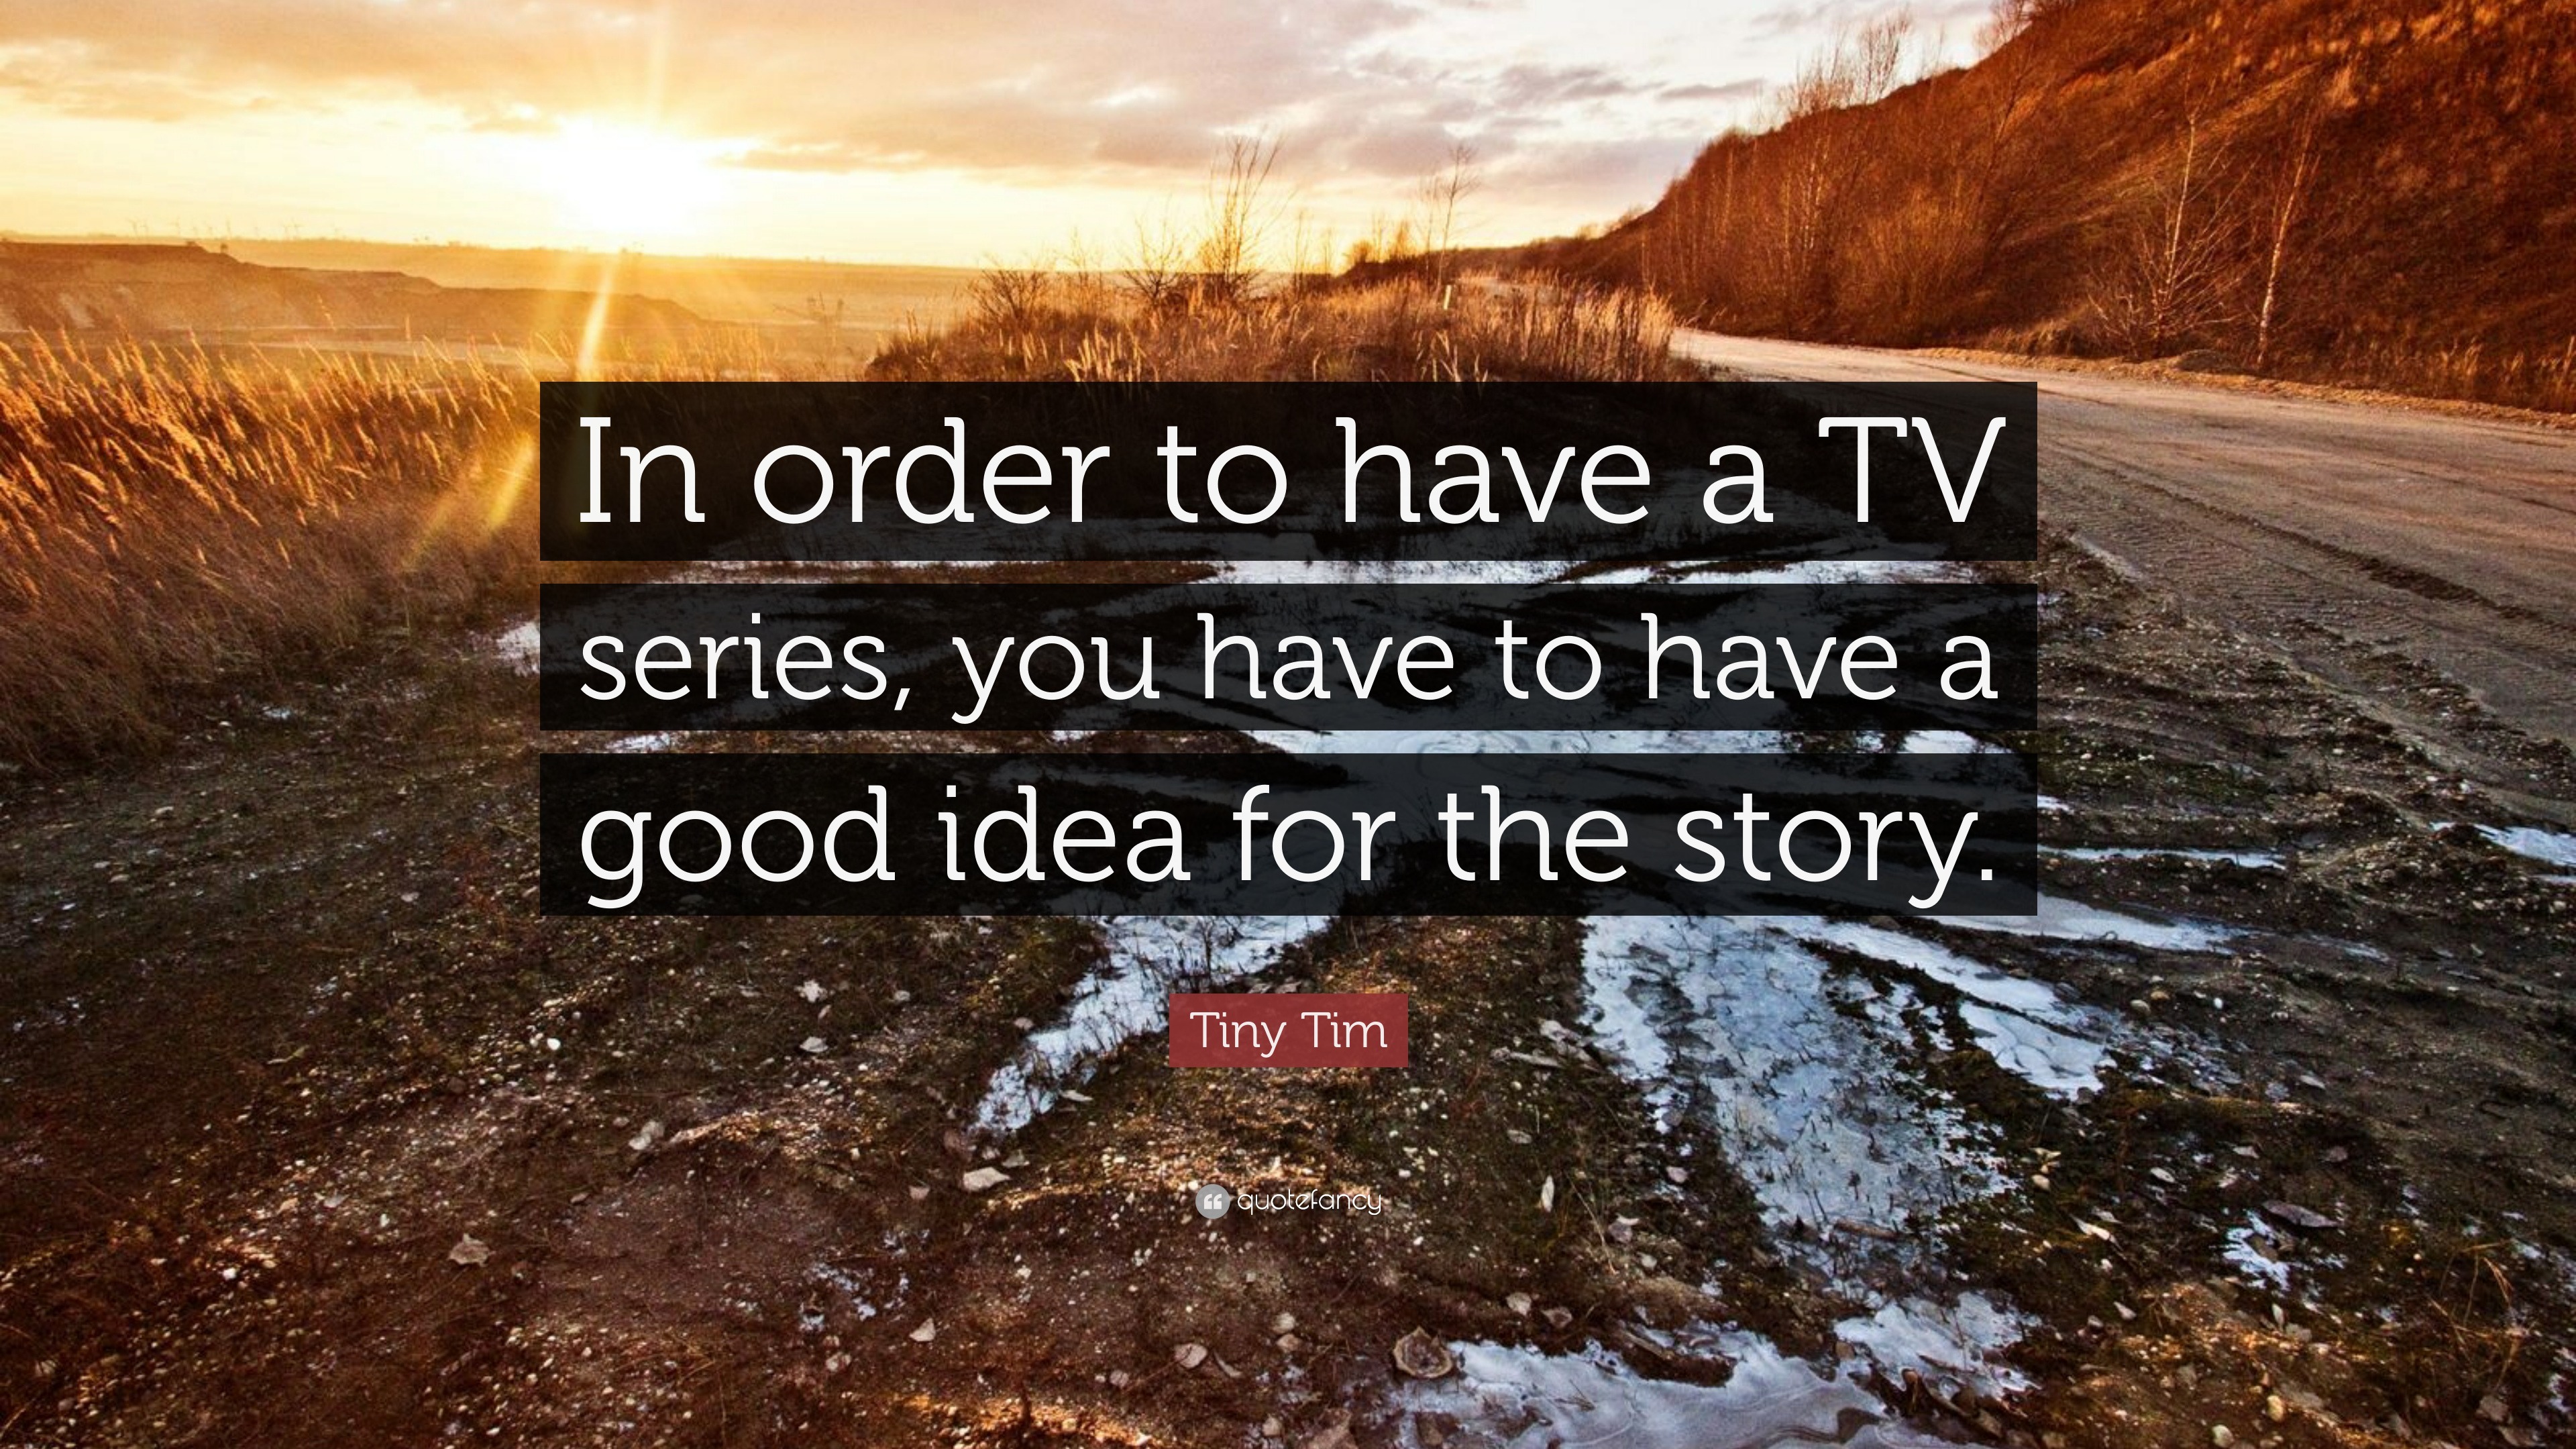 Tiny Tim Quote: “In order to have a TV series, you have to have a good